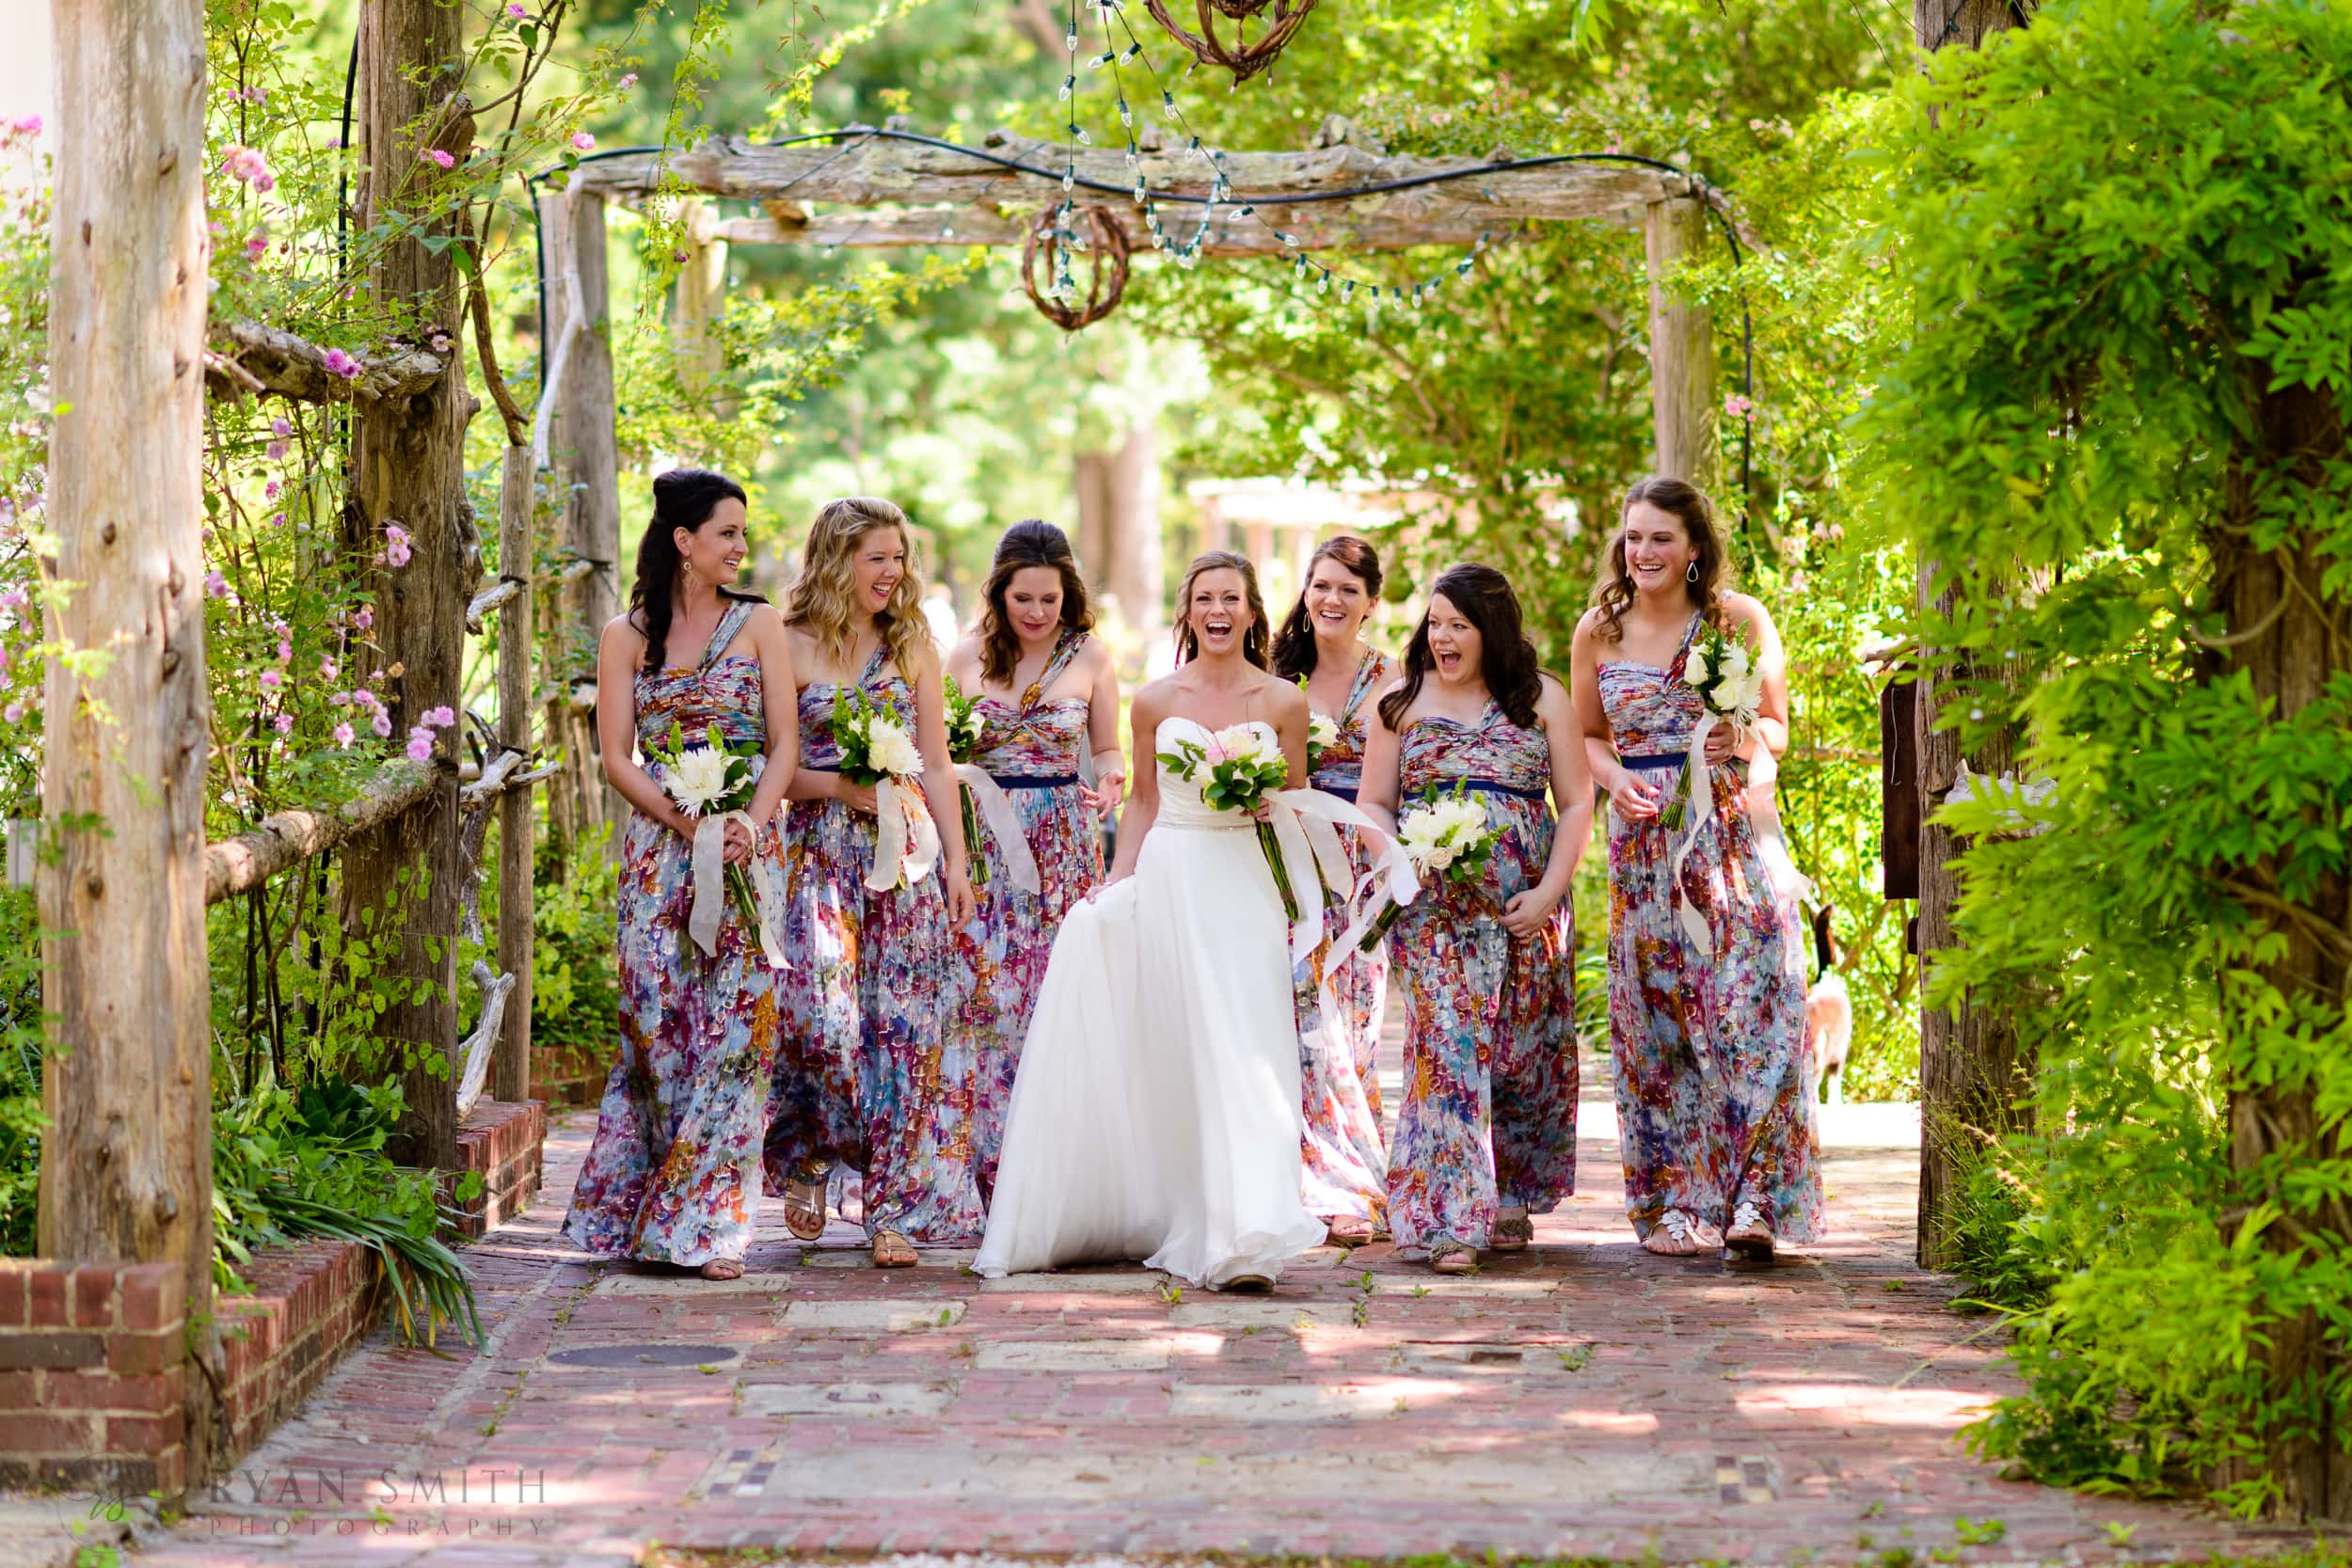 Bridal party having fun before the ceremony  - The Ivy Place